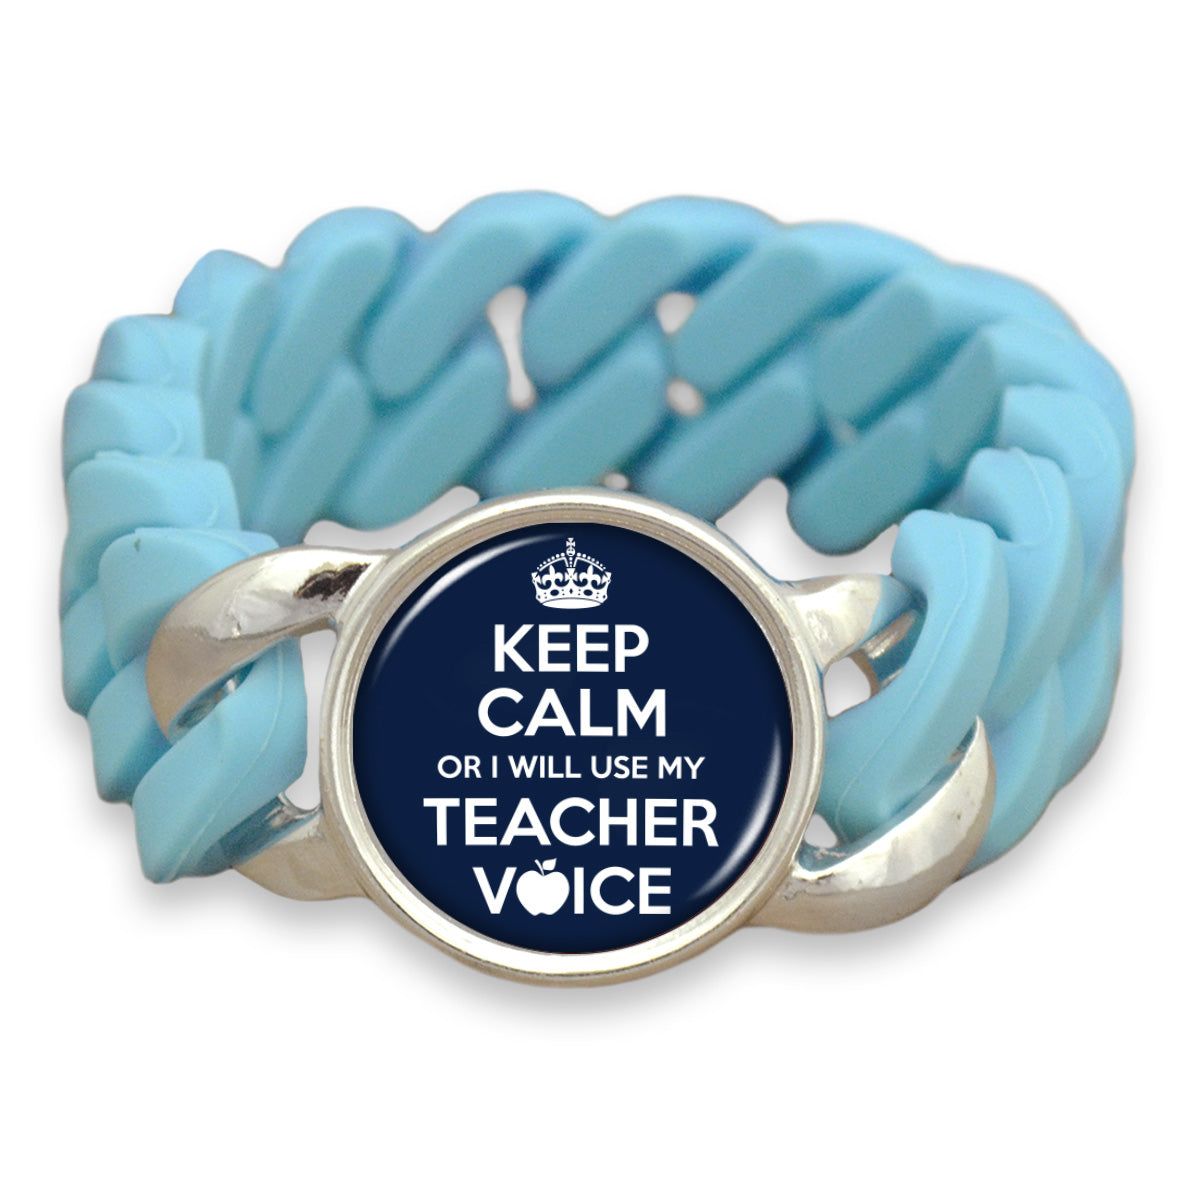 Keep Calm Or I Will Use My Teacher Voice Colored Silicone Stretch Bracelet